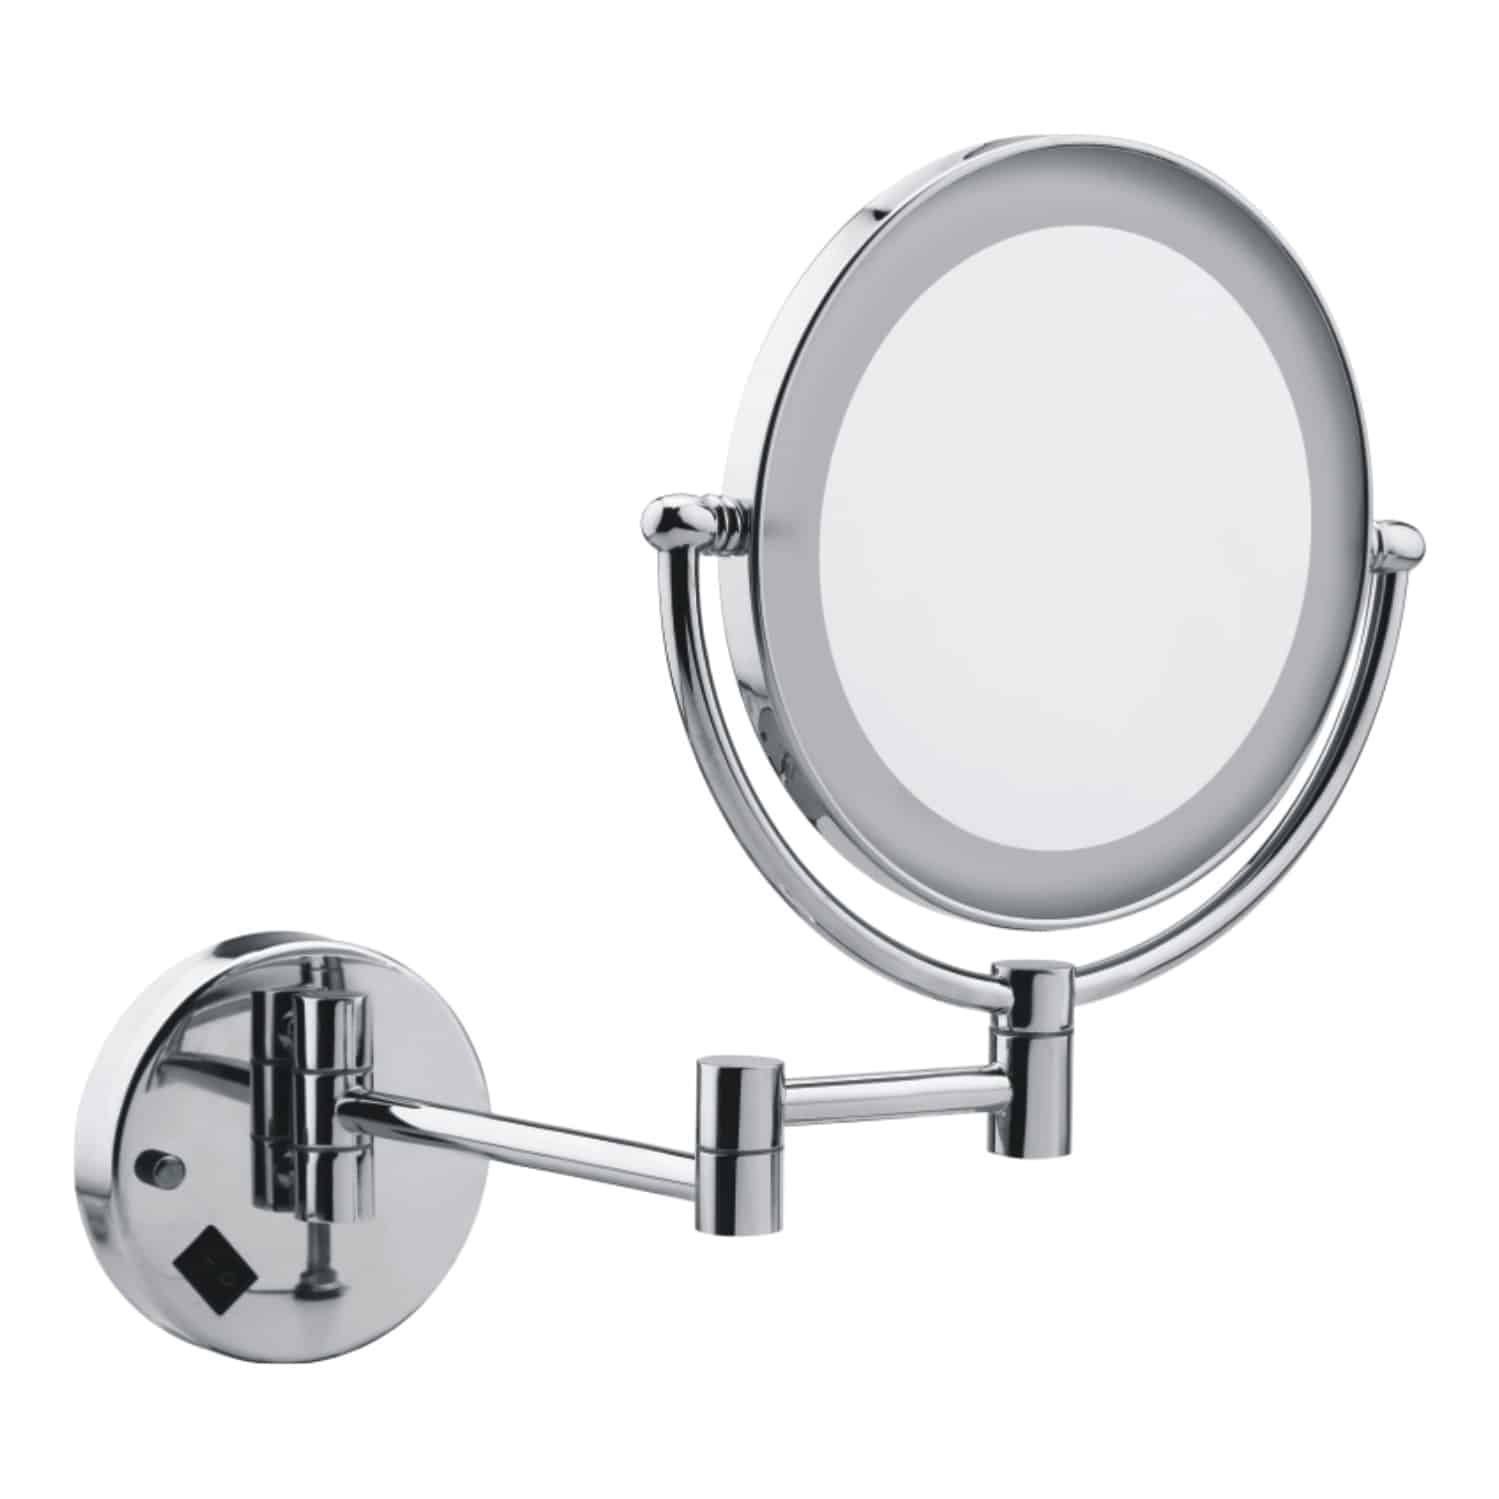 Goeka magnifying shaving mirror with light for bathroom and has different types.